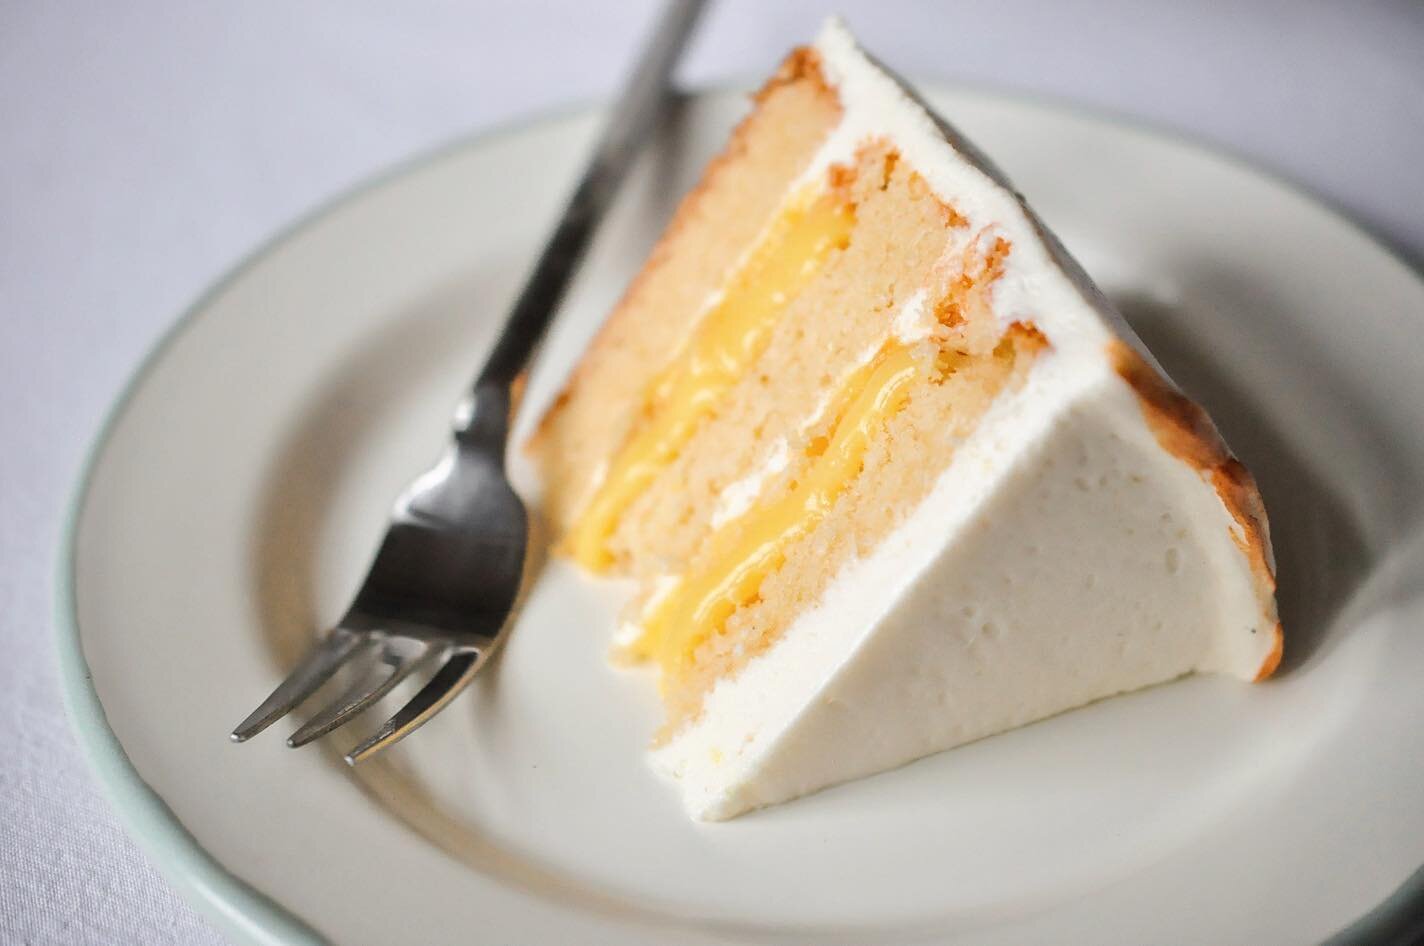 Simple, elegant, DELICIOUS. Our Lemon Curd Cake is triple lemony &ndash; lemon cake layers filled with fresh lemon curd, topped with lemon zest cream cheese icing. Perfect for springtime, and perfect for your mom this Mother's Day! This (and all of o